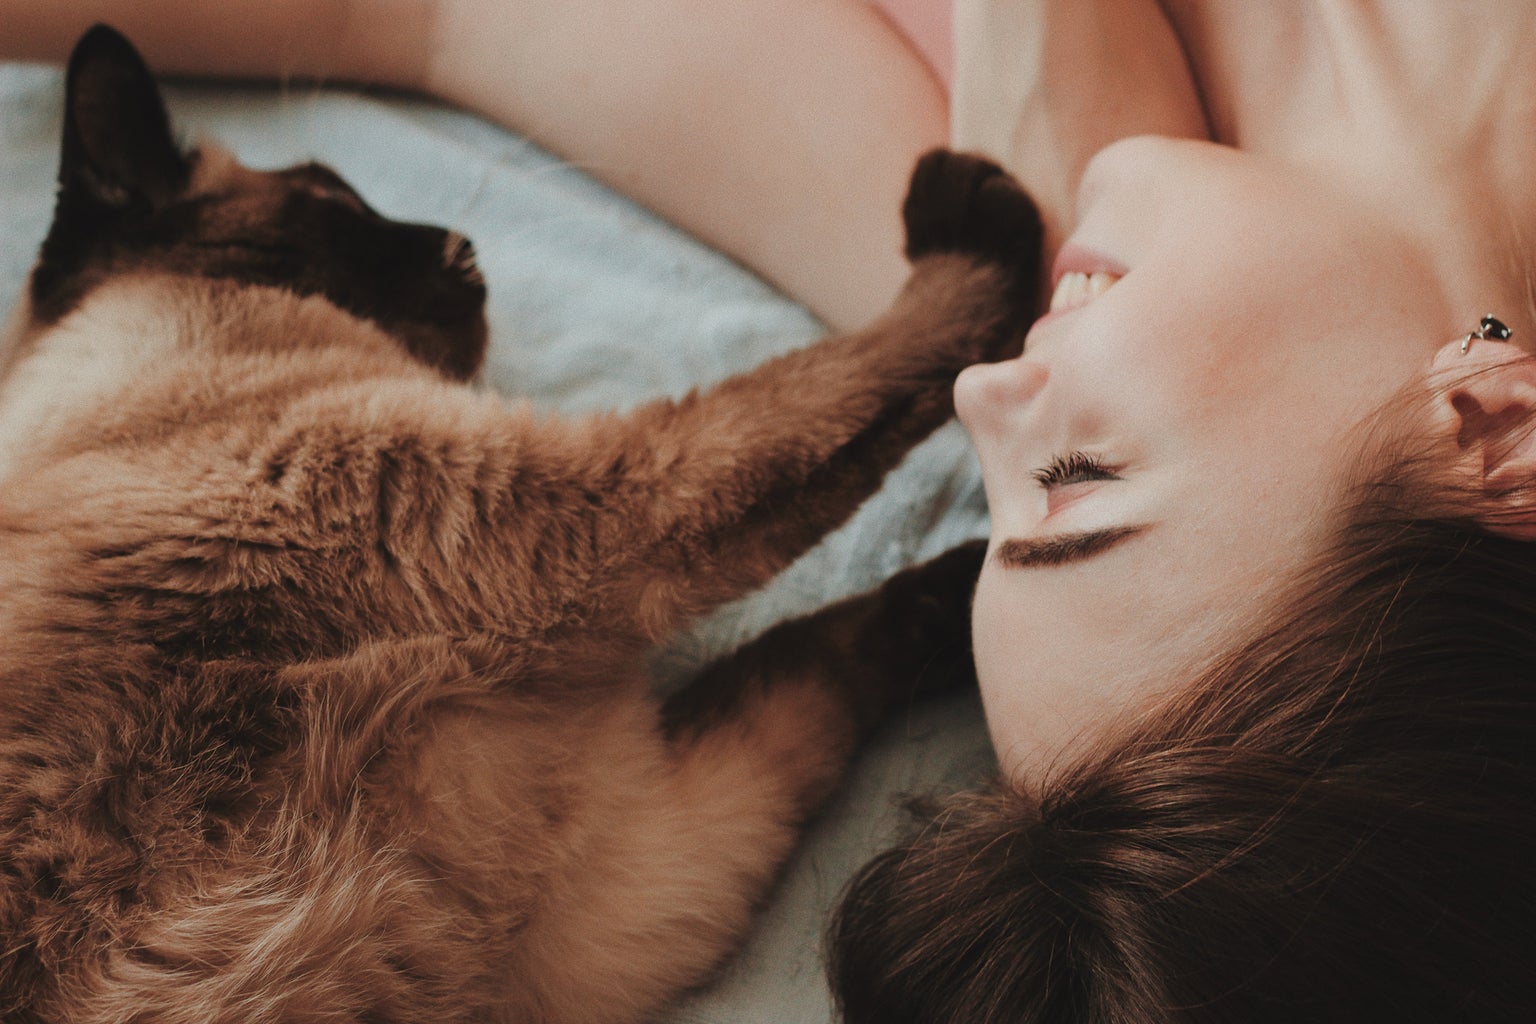 Girl lying on bed with cat